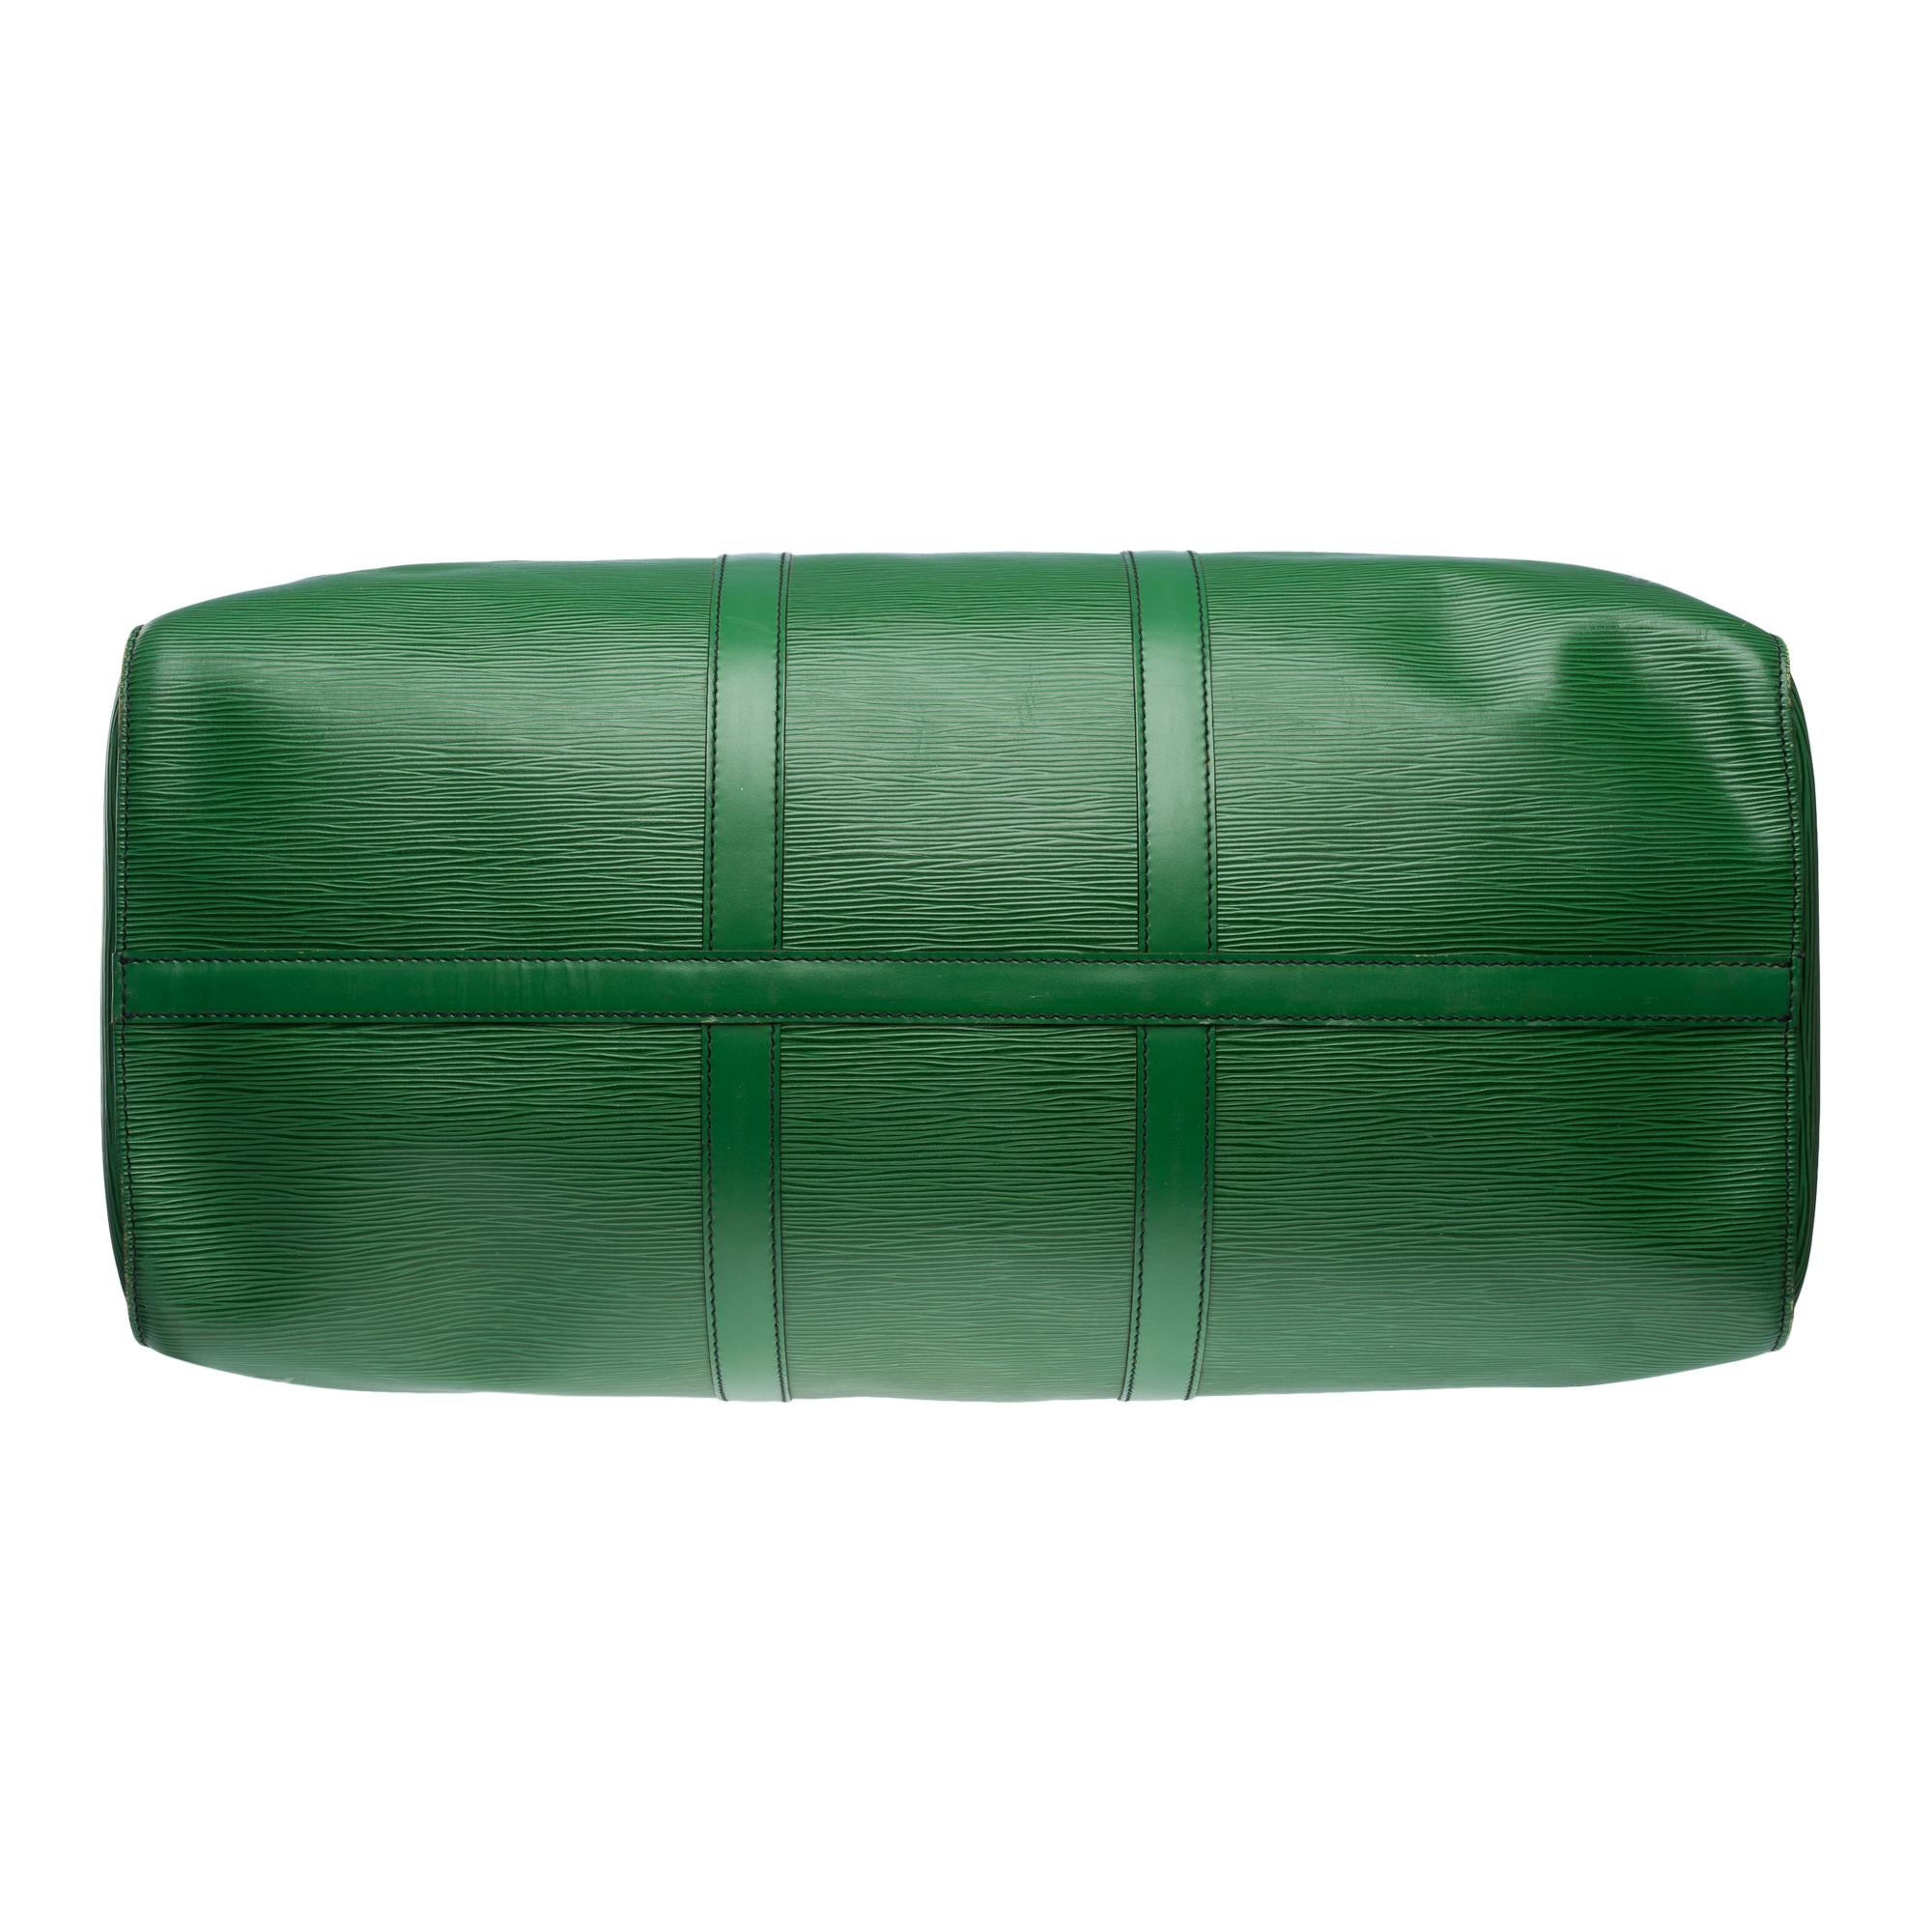 Louis Vuitton Keepall 50 Travel bag in Green épi leather, GHW 6